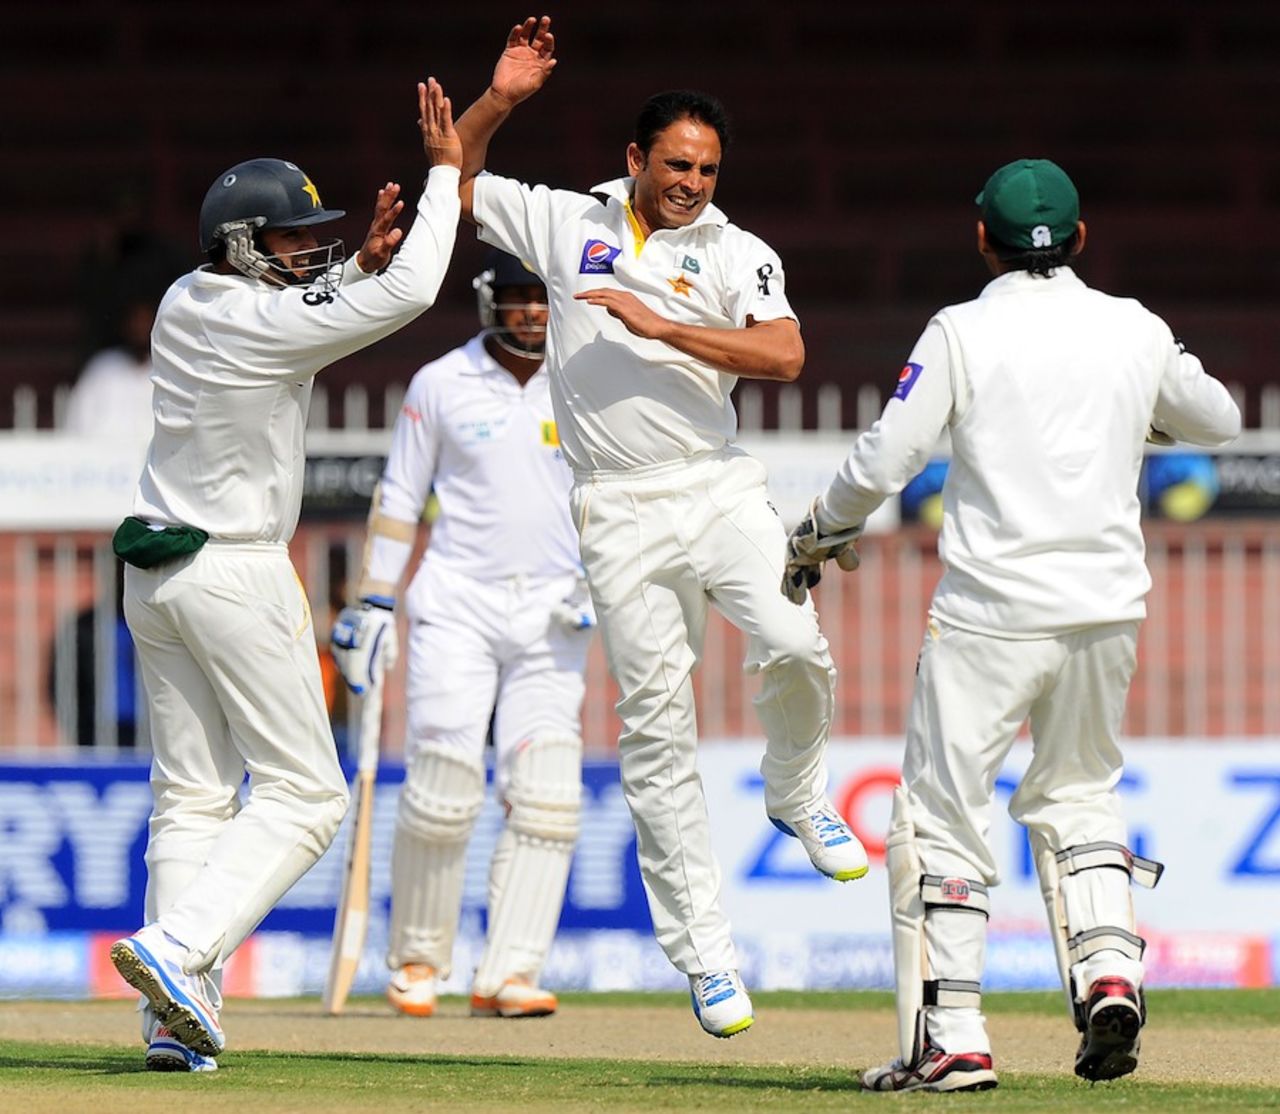 Abdur Rehman struck in the first over after lunch, Pakistan v Sri Lanka, 3rd Test, Sharjah, 1st day, January 16, 2014